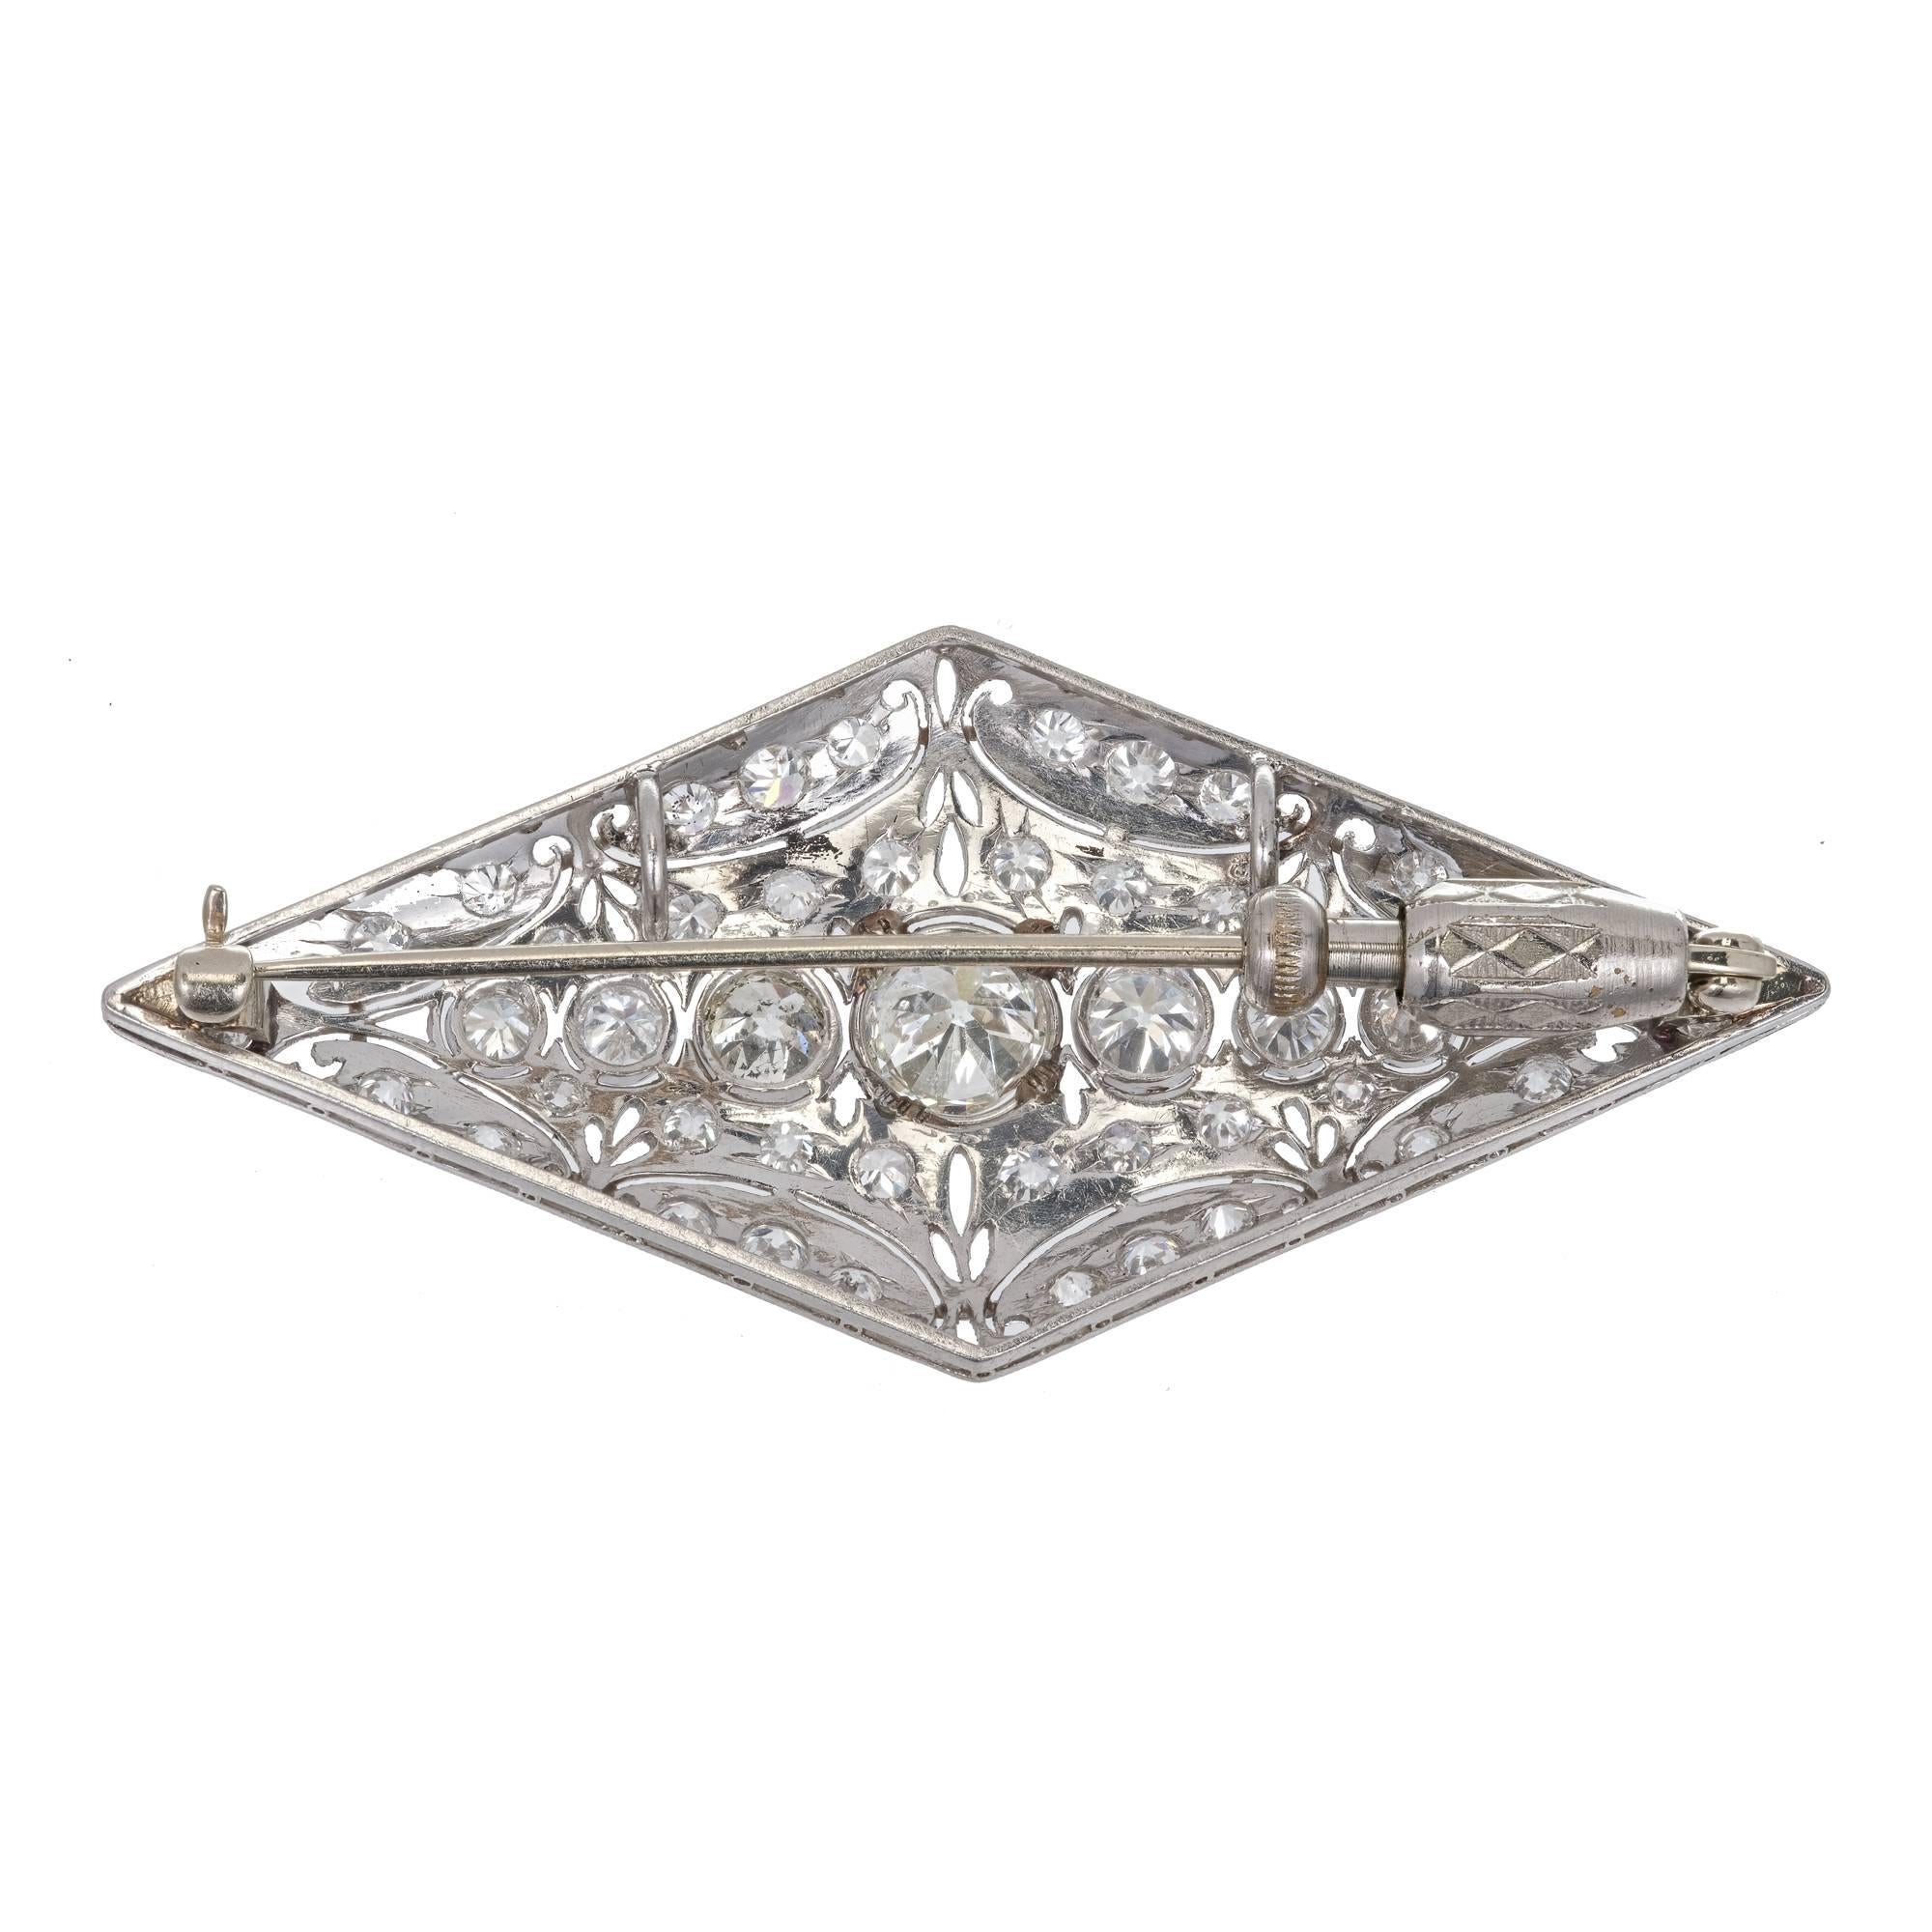 Art Deco solid Platinum and 14k white gold Diamond brooche.  All handmade set with Old European cut and transitional cut diamonds.  Beautiful hand engraving, bead setting and piercing.  The center row of diamonds are wet in delicate bezels with